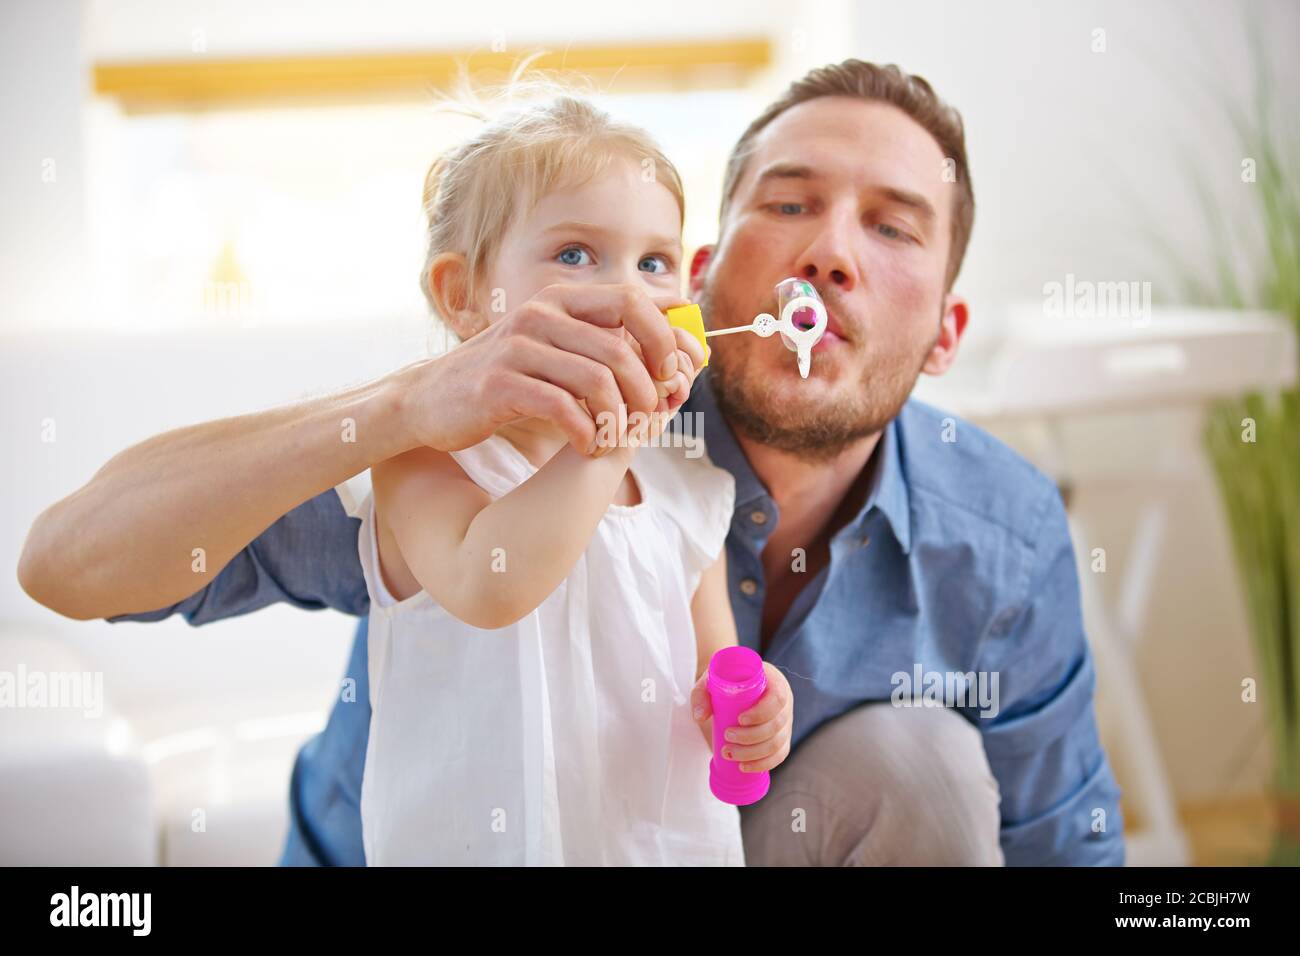 Father and child blow bubbles together at home Stock Photo